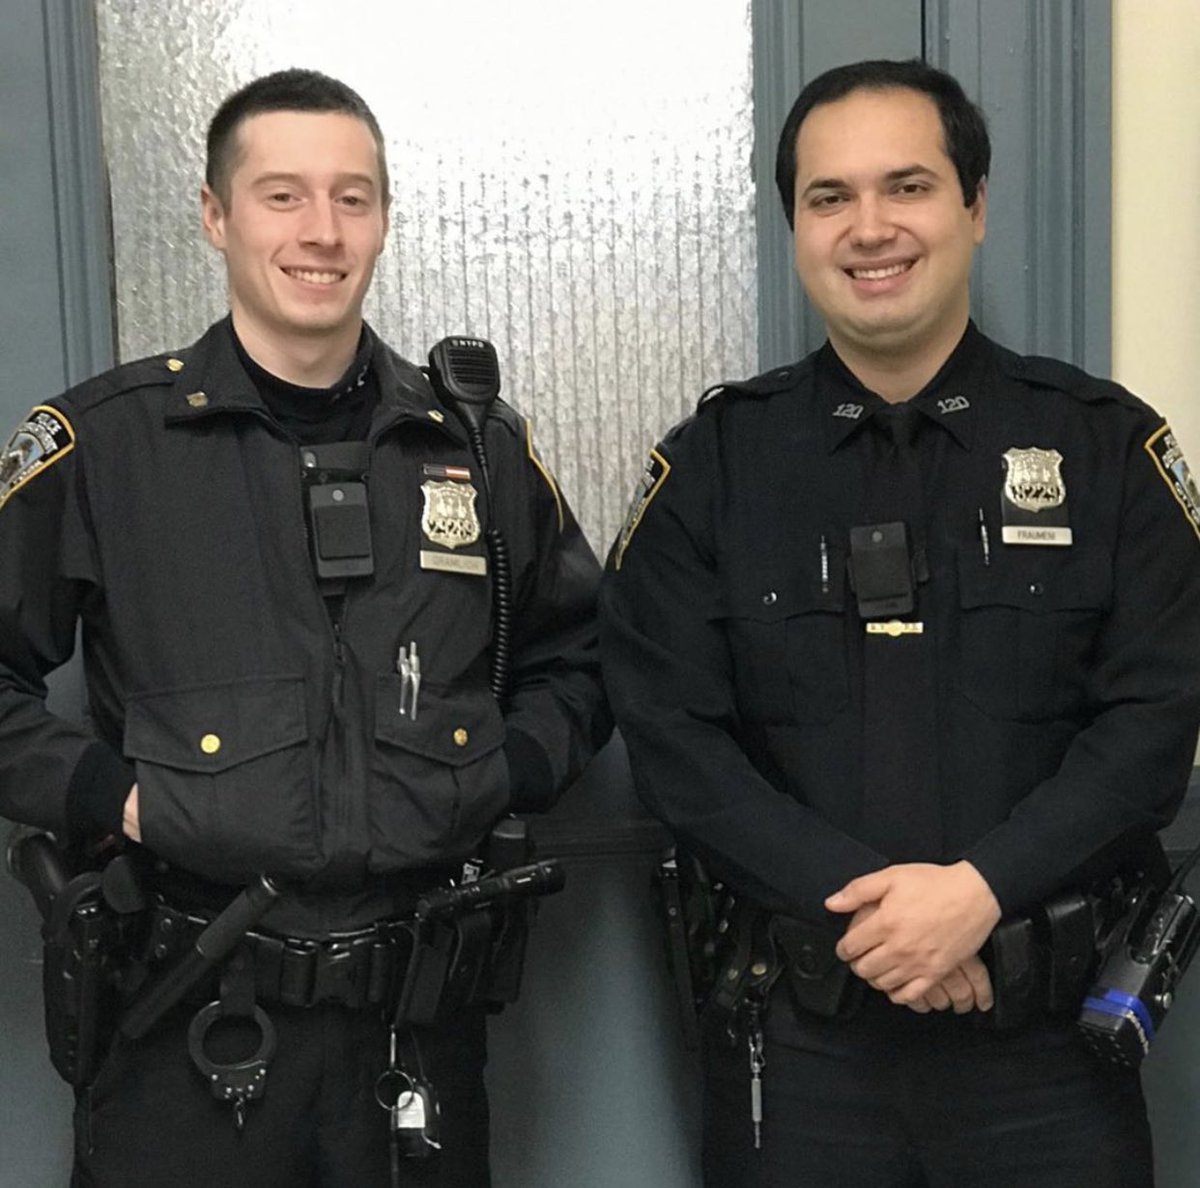 Officers Fraumeni & Gramlich responded to a 911 call about a man who was stabbed on a bus. Their quick response time meant they were able to get the victim the help he needed & catch the criminal.  #BacktheBlue